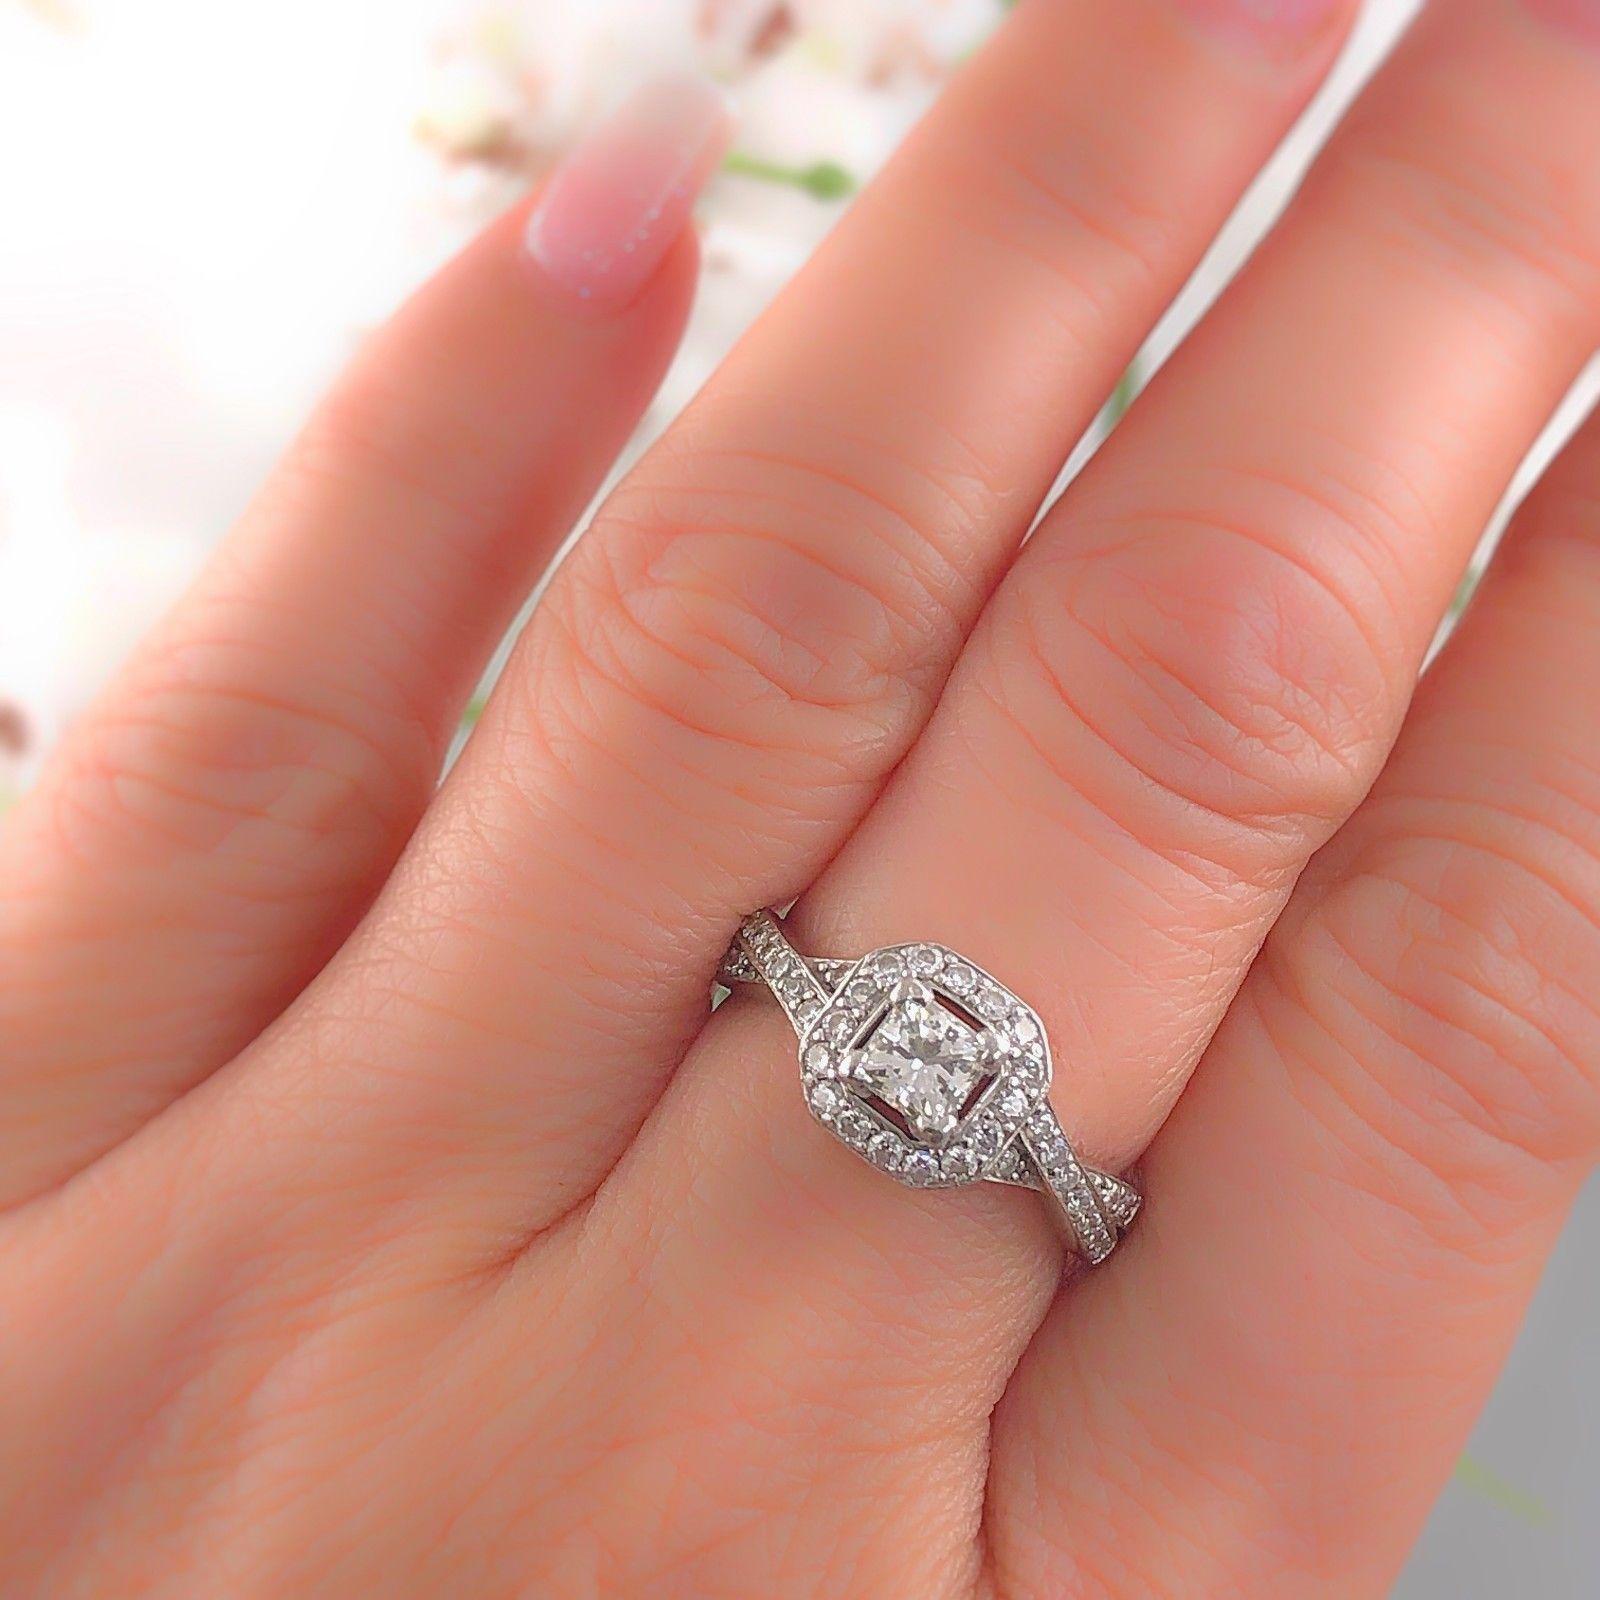 PRINCESS DIAMOND ENGAGEMENT RING
Style:  Halo with Twisted Diamond Band
Metal:  14k White Gold
Size:  6.5 - sizable
Total Carat Weight:  1.00 tcw
Center Diamond Shape:  Princess Cut ( Square Modified Brilliant ) 0.485 cts G color, SI1